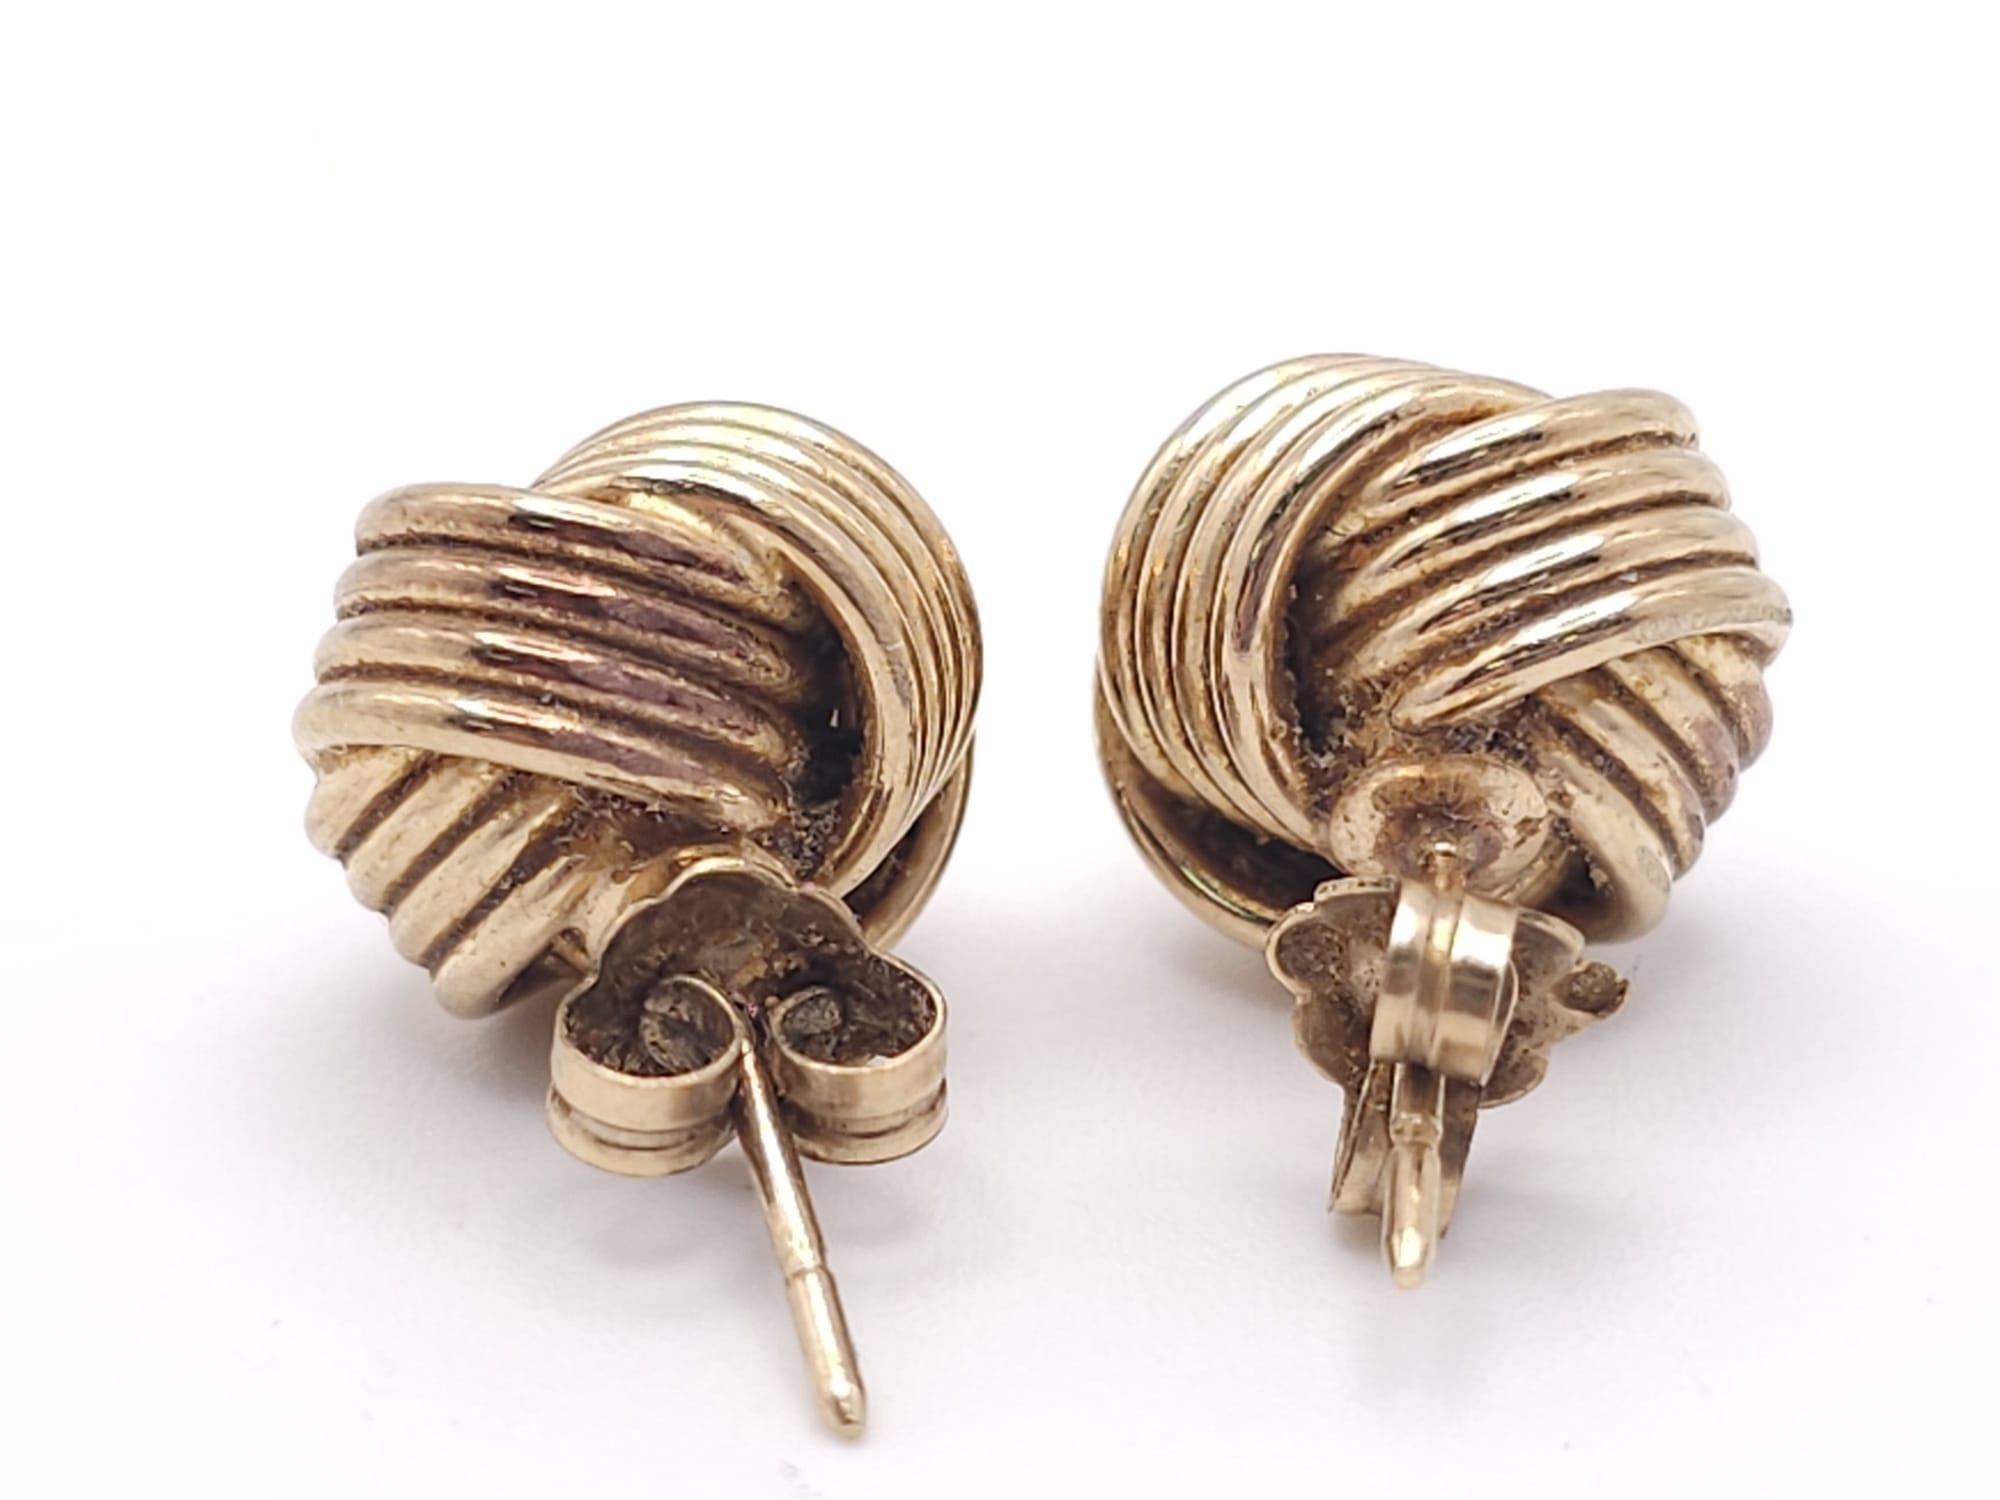 A Pair of 9k Yellow Gold Knot Stud Earrings. 3.8g total weight. Ref: 16469 - Image 4 of 6